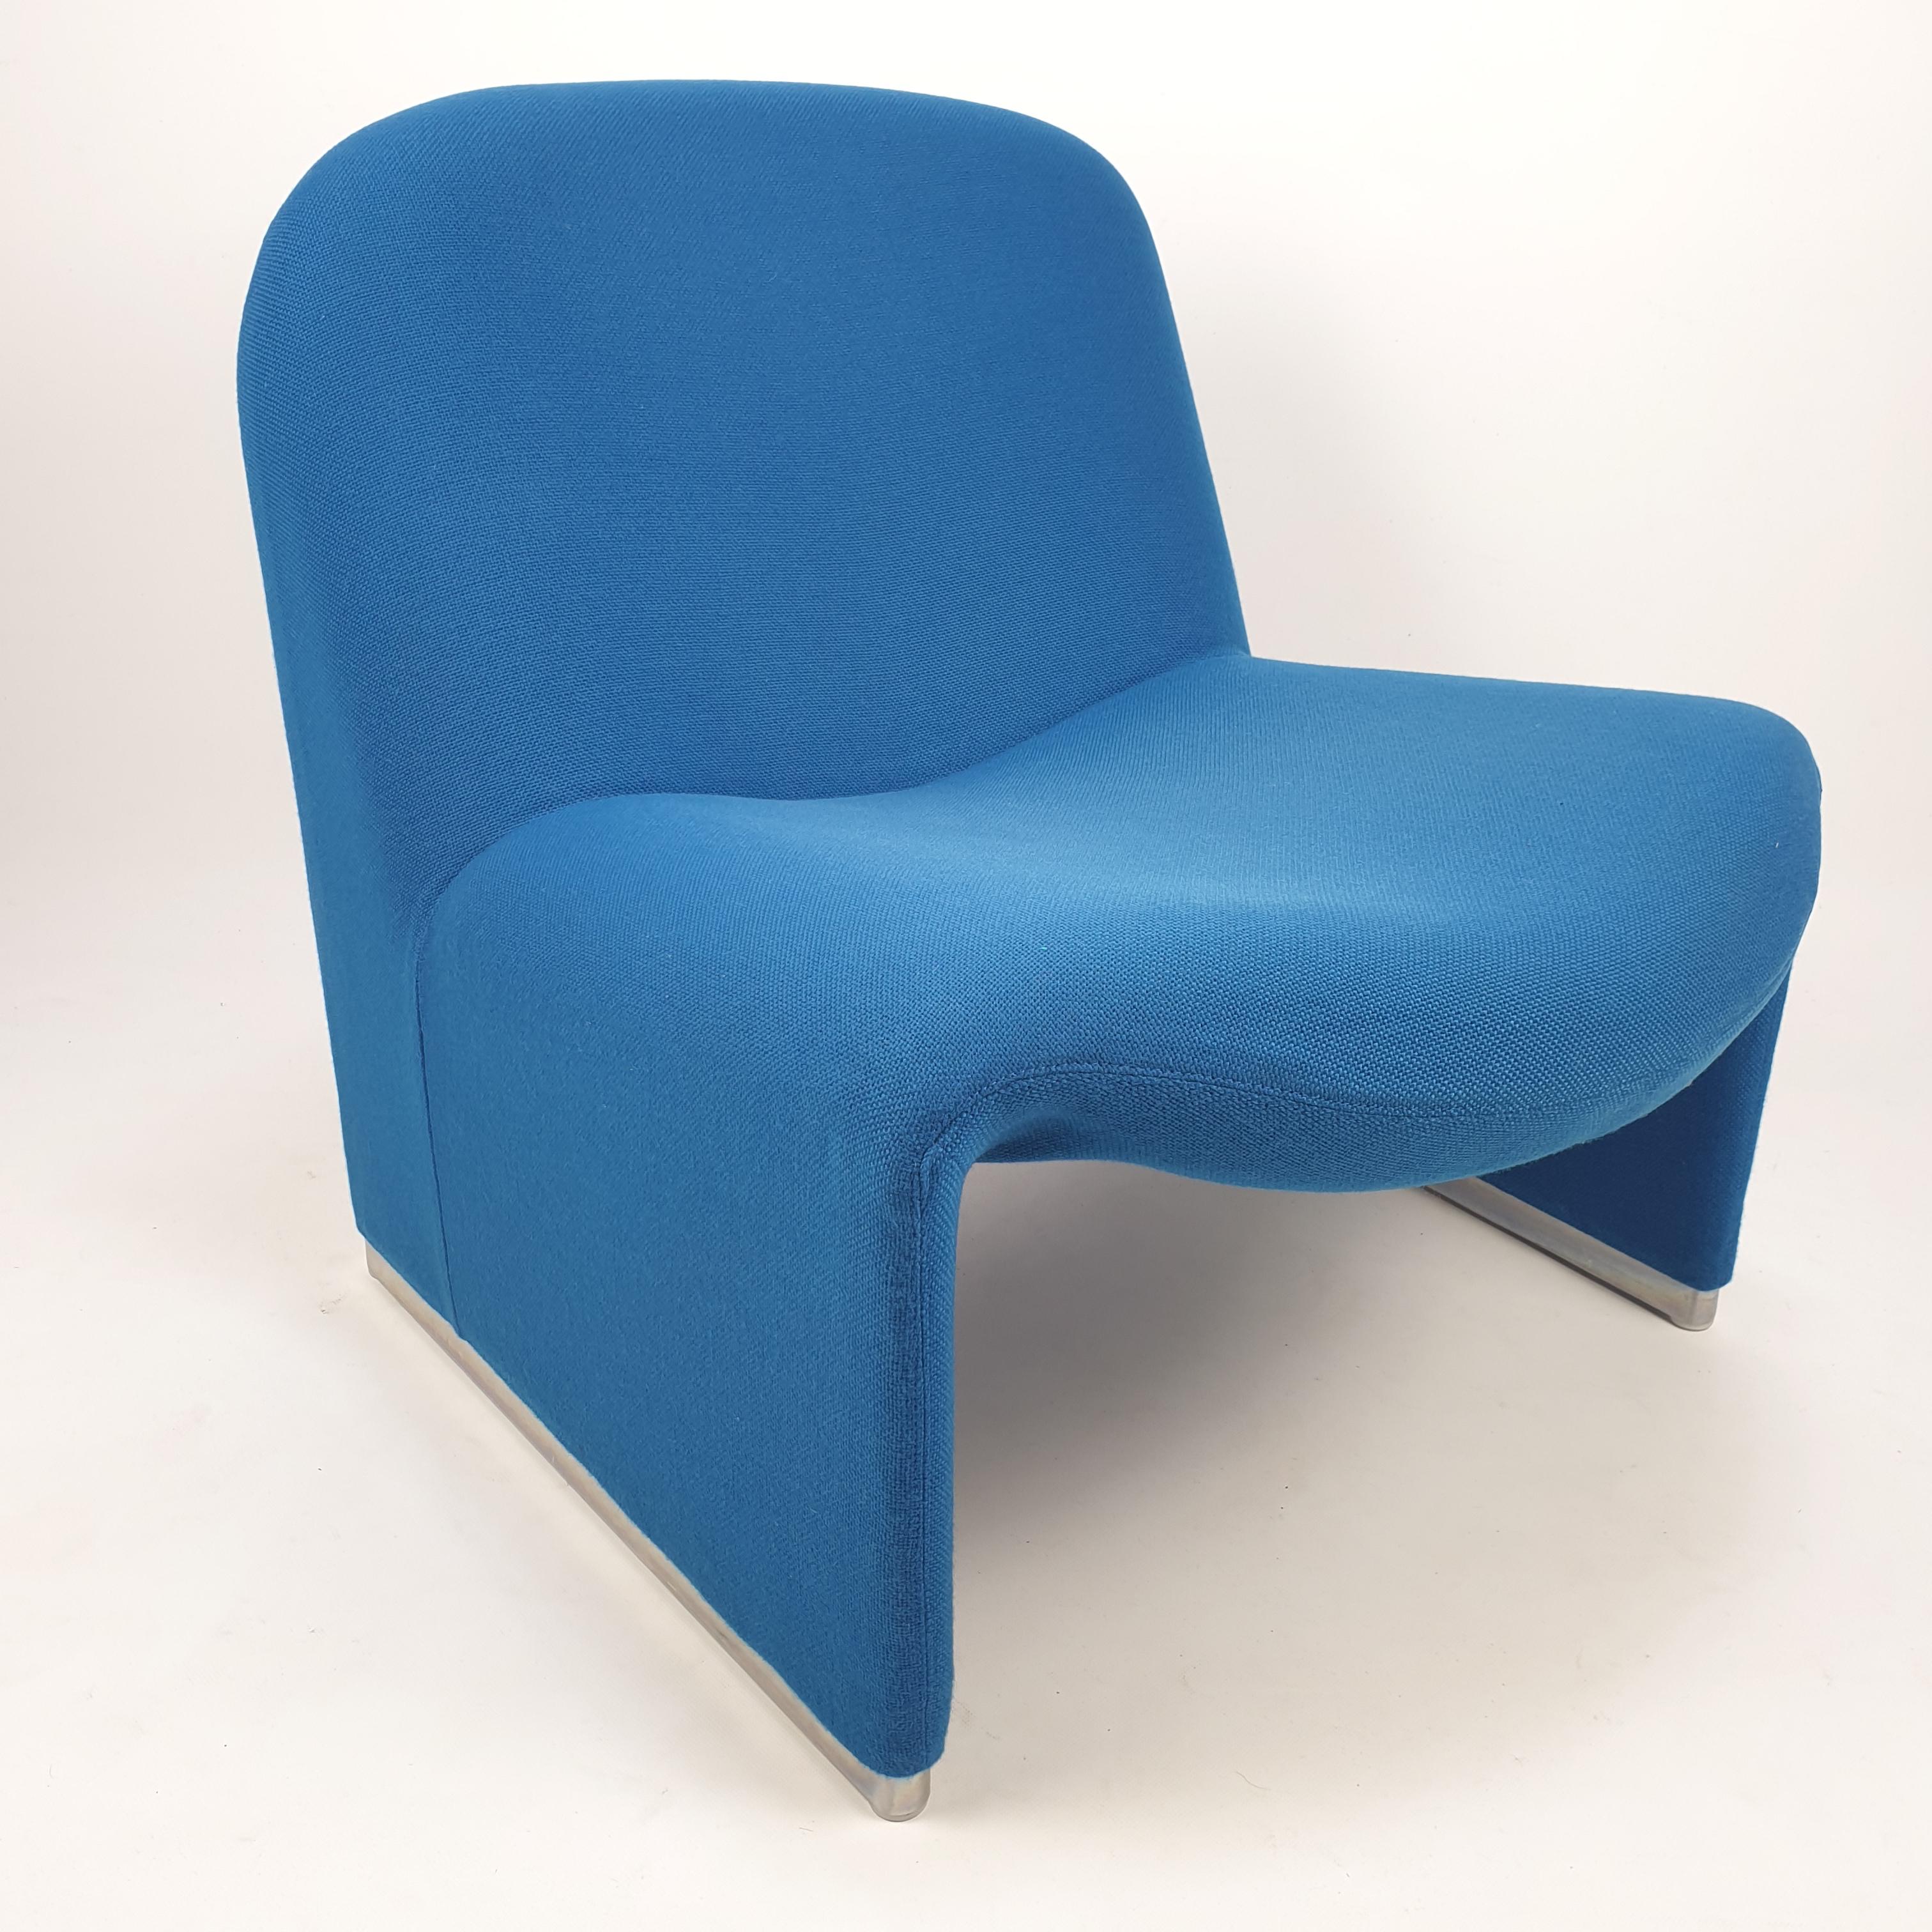 Lovely and comfortable Alky chair. Designed by Giancarlo Piretti in 1969, produced by Artifort. Original blue wool fabric and aluminum base.